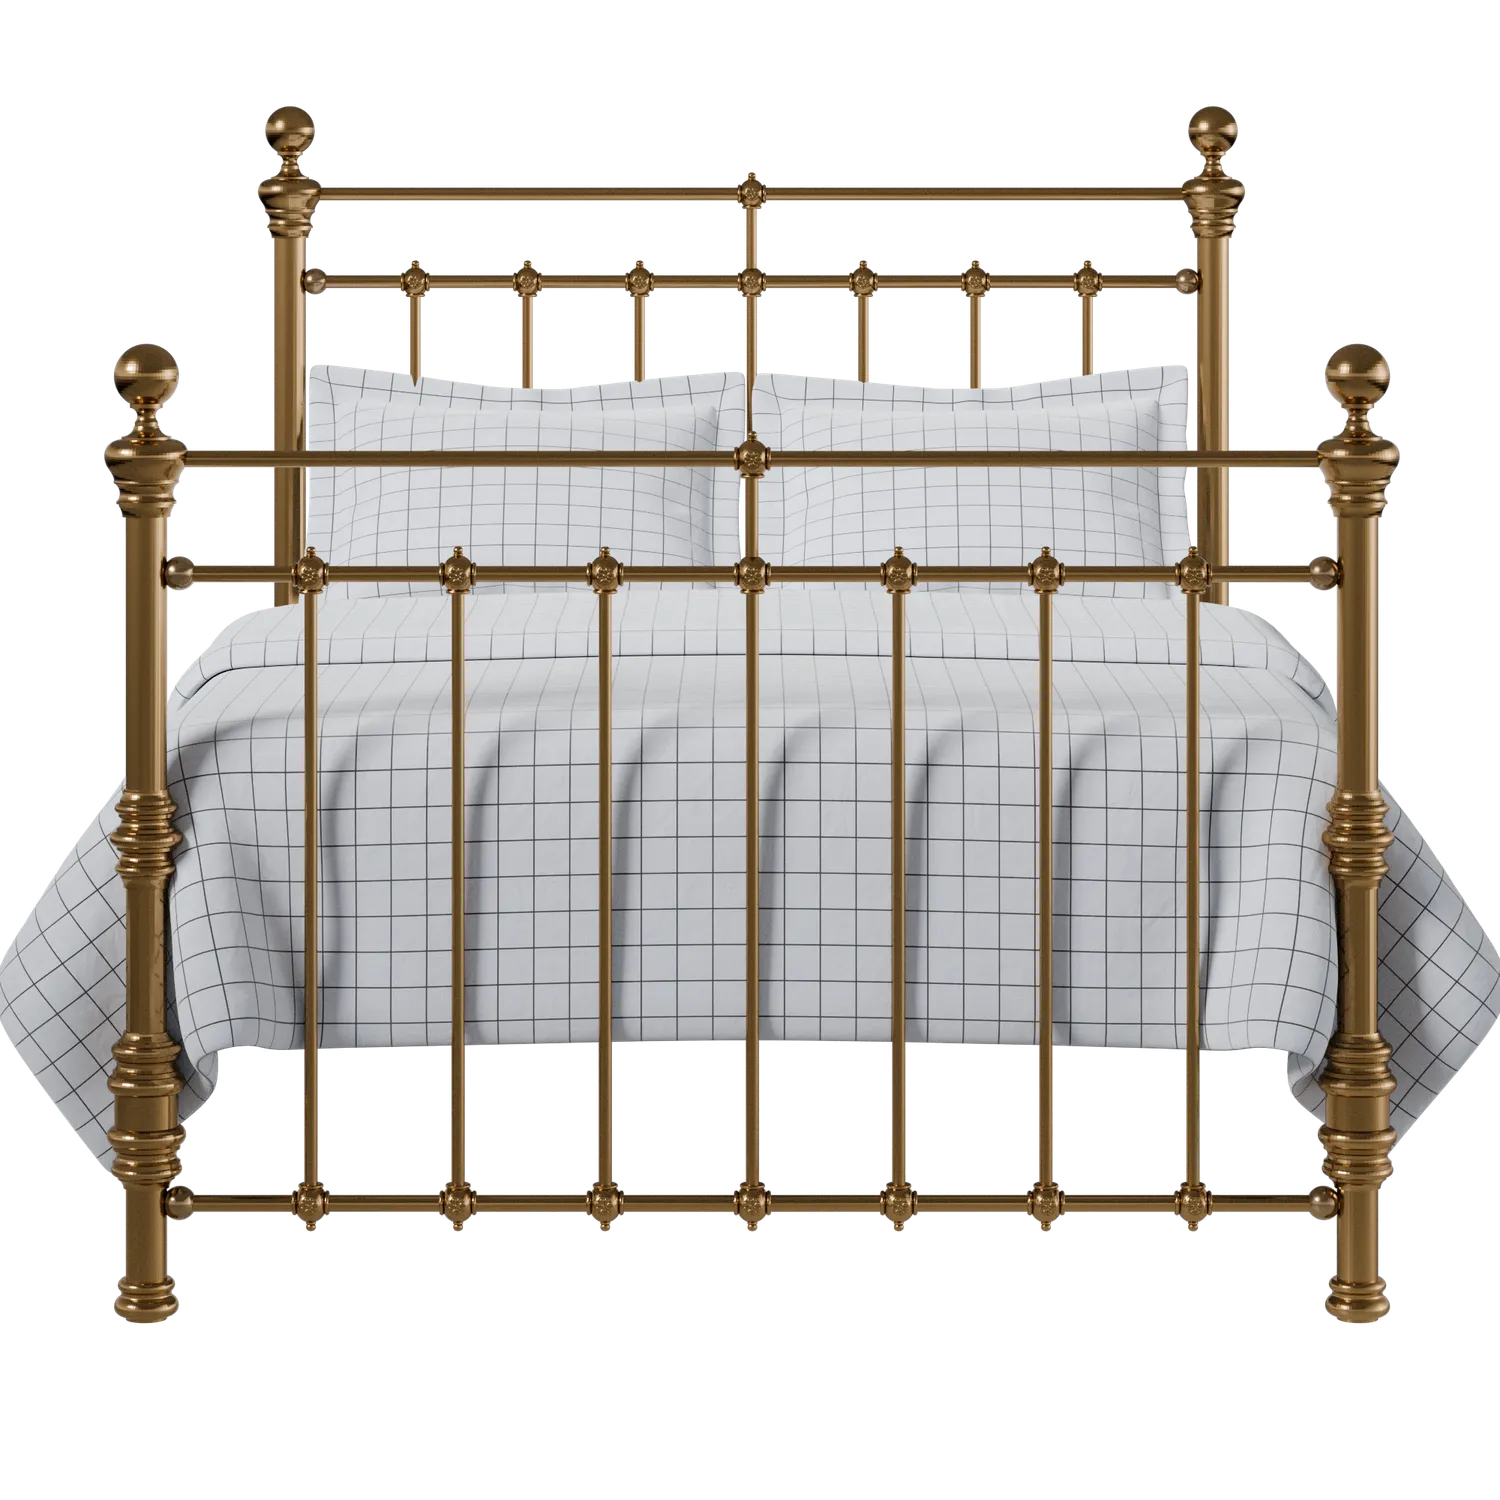 Waterford brass bed with Juno mattress